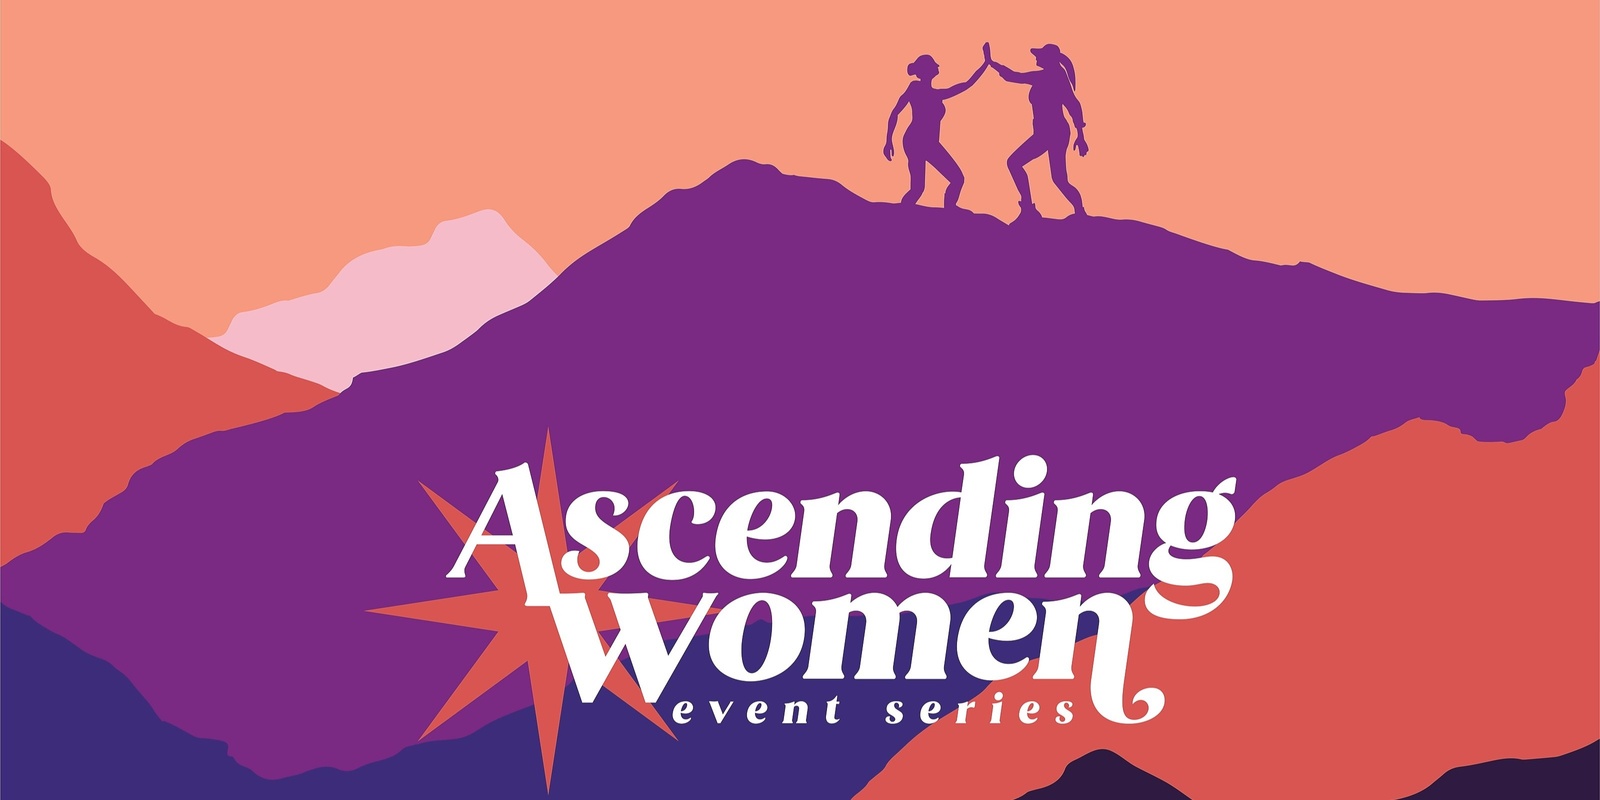 Banner image for Ascending Women: Lifting up the Voice of Others